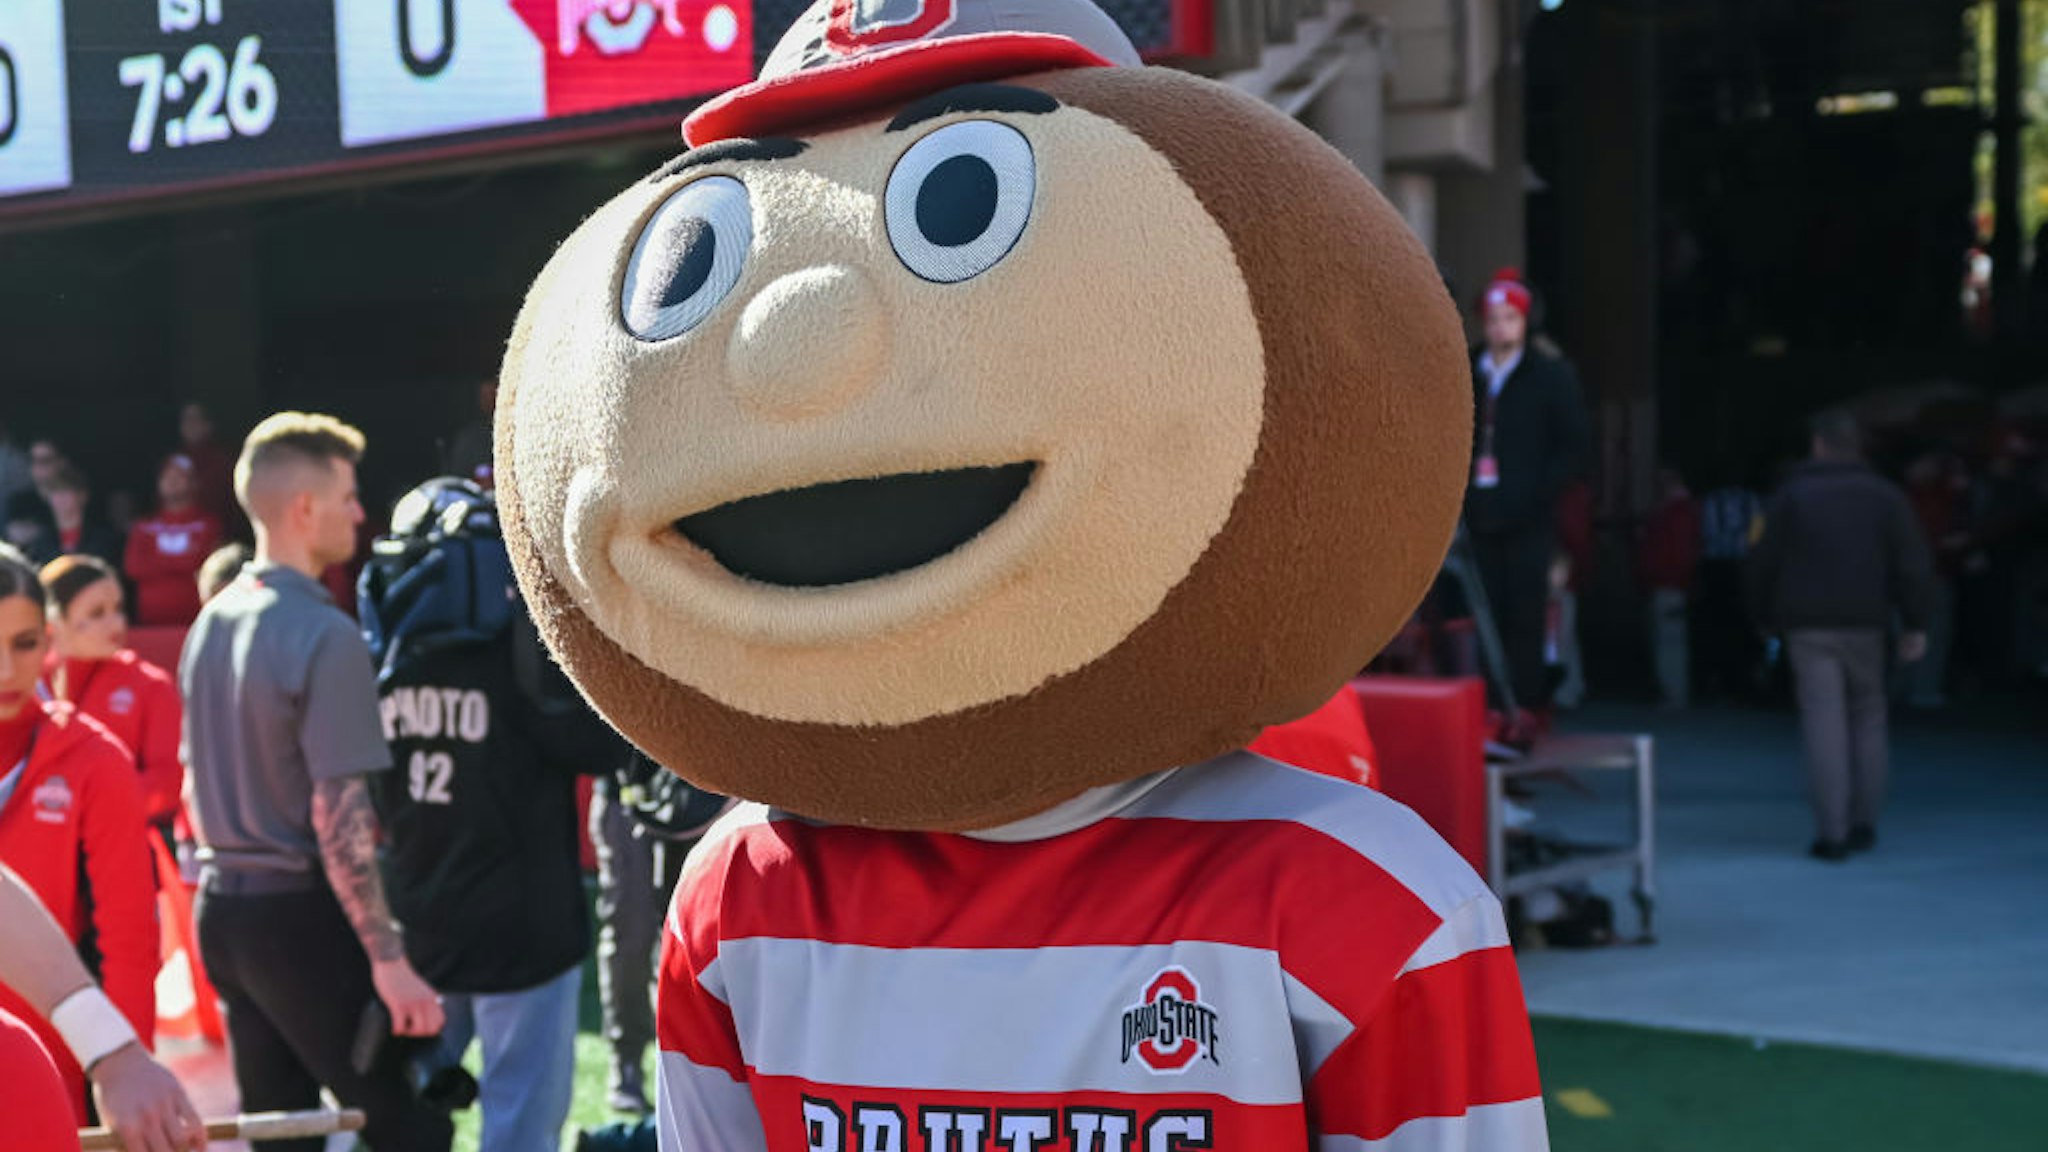 LINCOLN, NE - NOVEMBER 6: The mascot of the Ohio State Buckeyes awaits the start of the game against the Nebraska Cornhuskers at Memorial Stadium on November 6, 2021 in Lincoln, Nebraska. (Photo by Steven Branscombe/Getty Images)